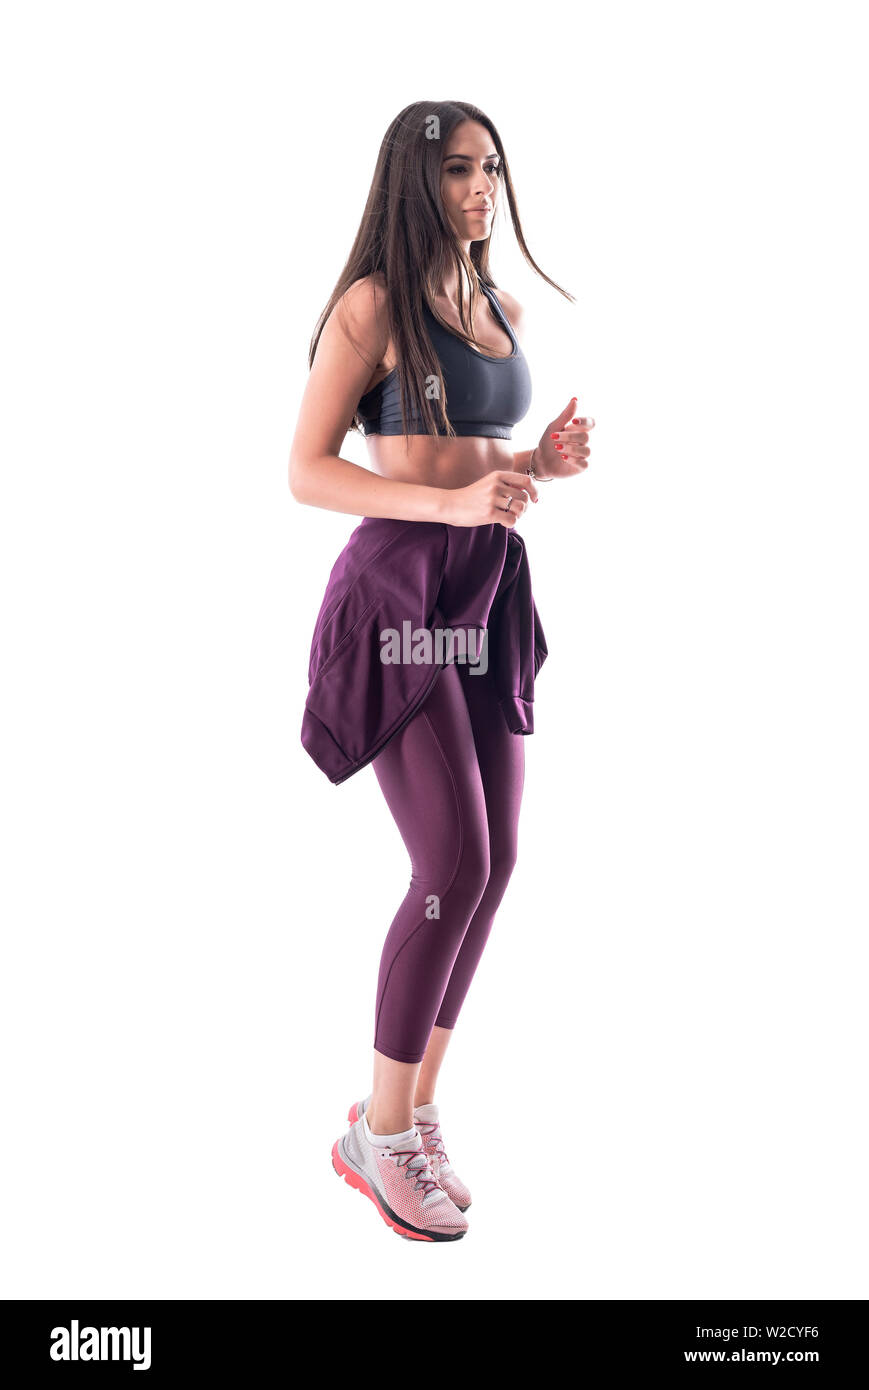 9,453 Woman Wearing Yoga Pants Images, Stock Photos, 3D objects